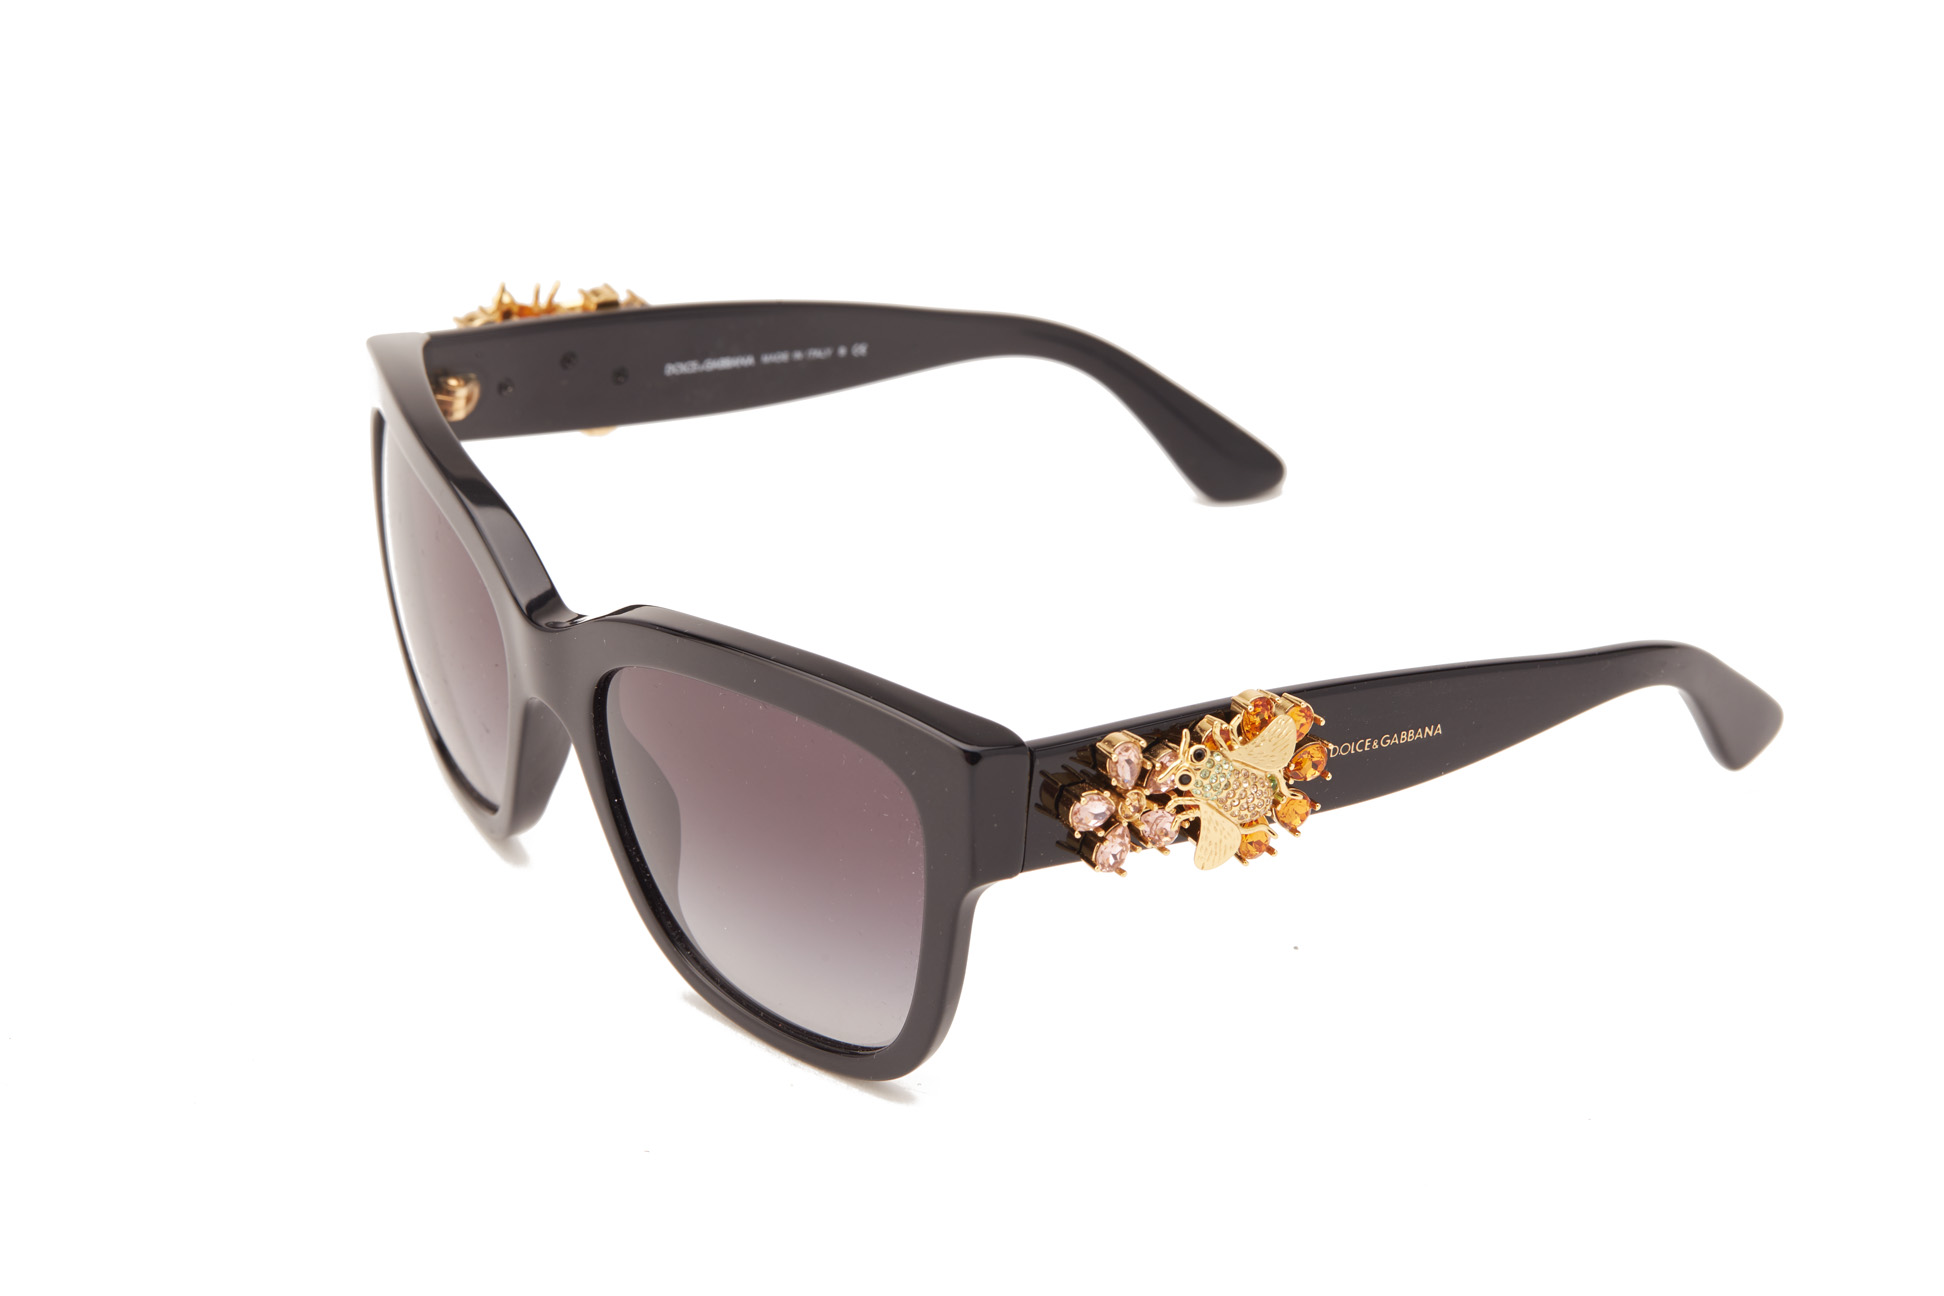 A PAIR OF DOLCE & GABBANA 'ENCHANTED BEAUTIES' SUNGLASSES - Image 2 of 4